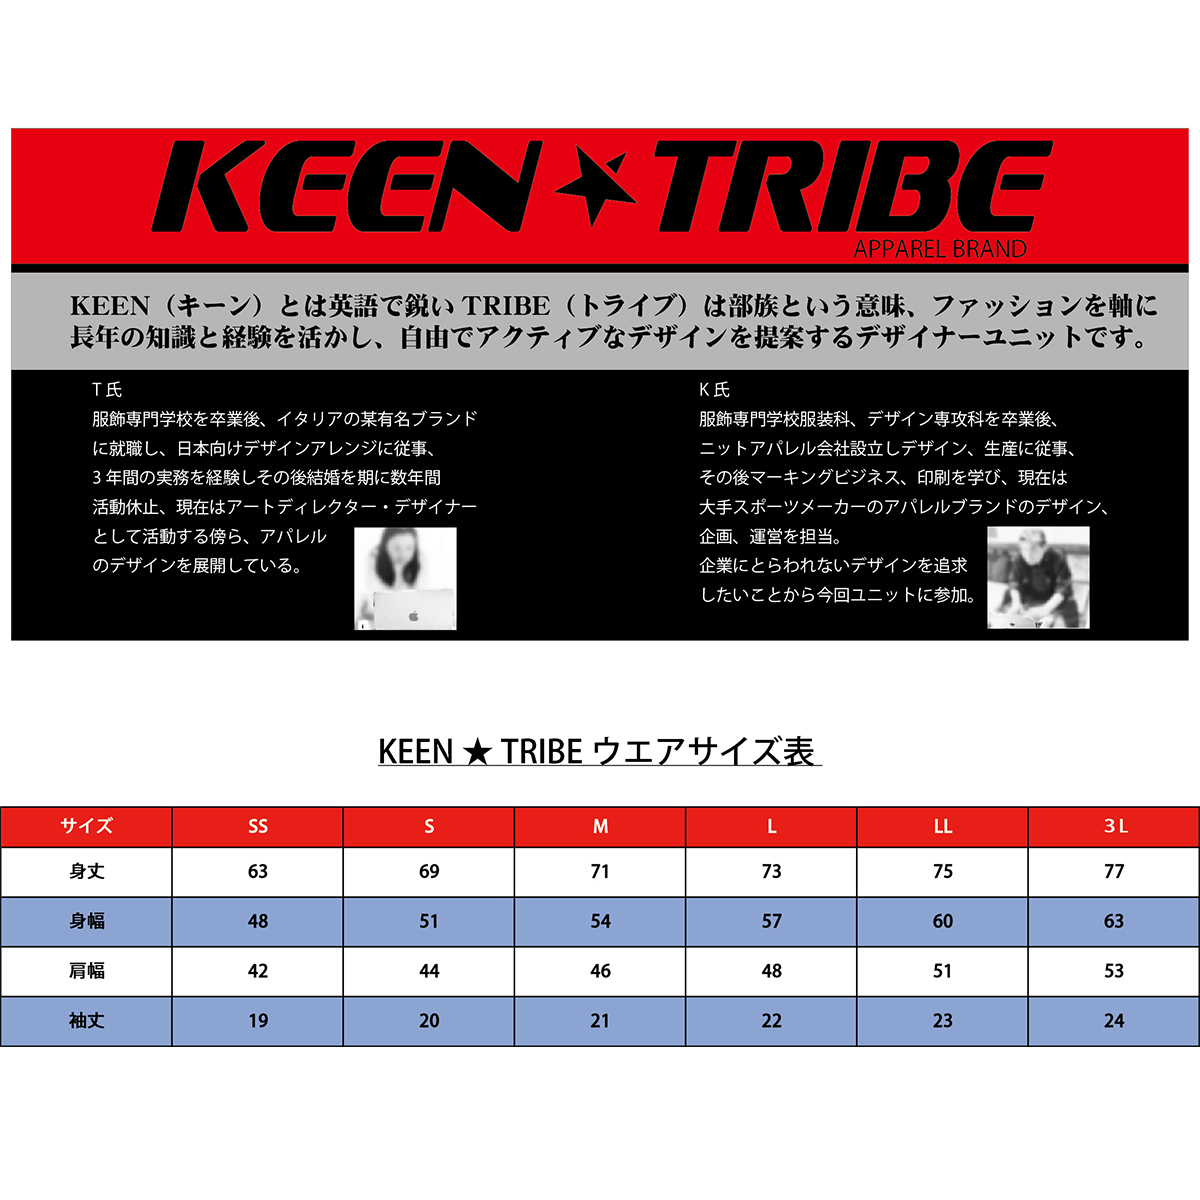 KEEN ★ TRIBE　KT-23(受注生産)